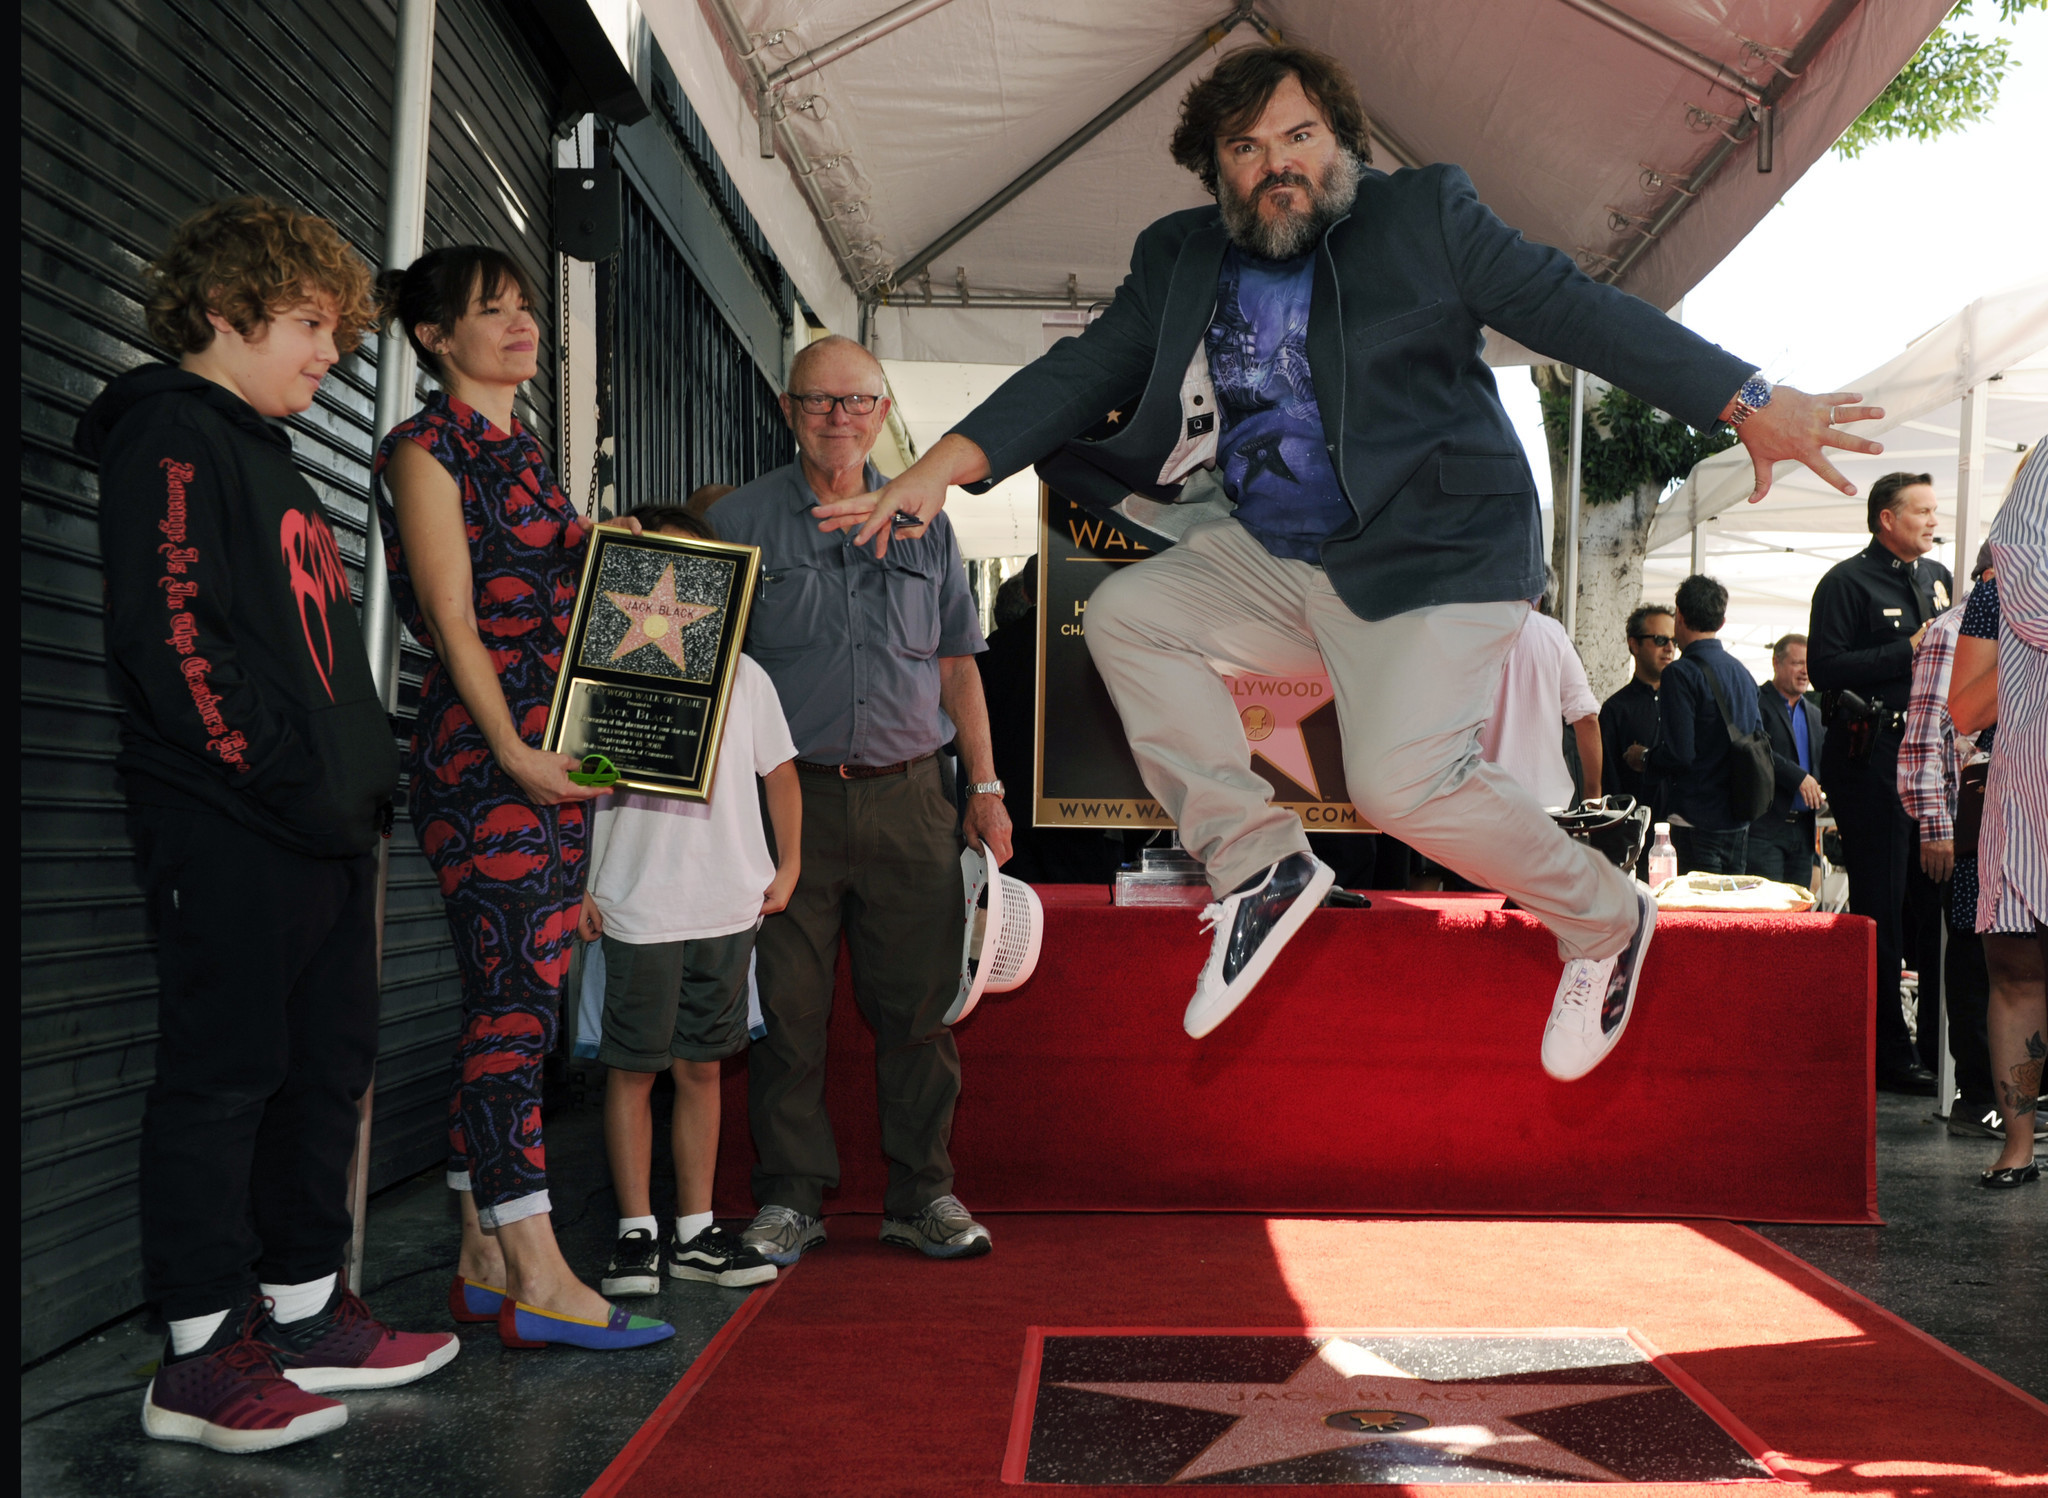 In classic Jack Black fashion, the actor was jumping for joy at this Hollywood Walk of Fame ceremony on Sept. 18, 2018. Black was joined by wife Tanya Haden, sons Sammy (l.) and Thomas, and dad Tom (back) for the photo op. His Tenacious D bandmate Kyle Gass was also present to praise his friend with congratulations.